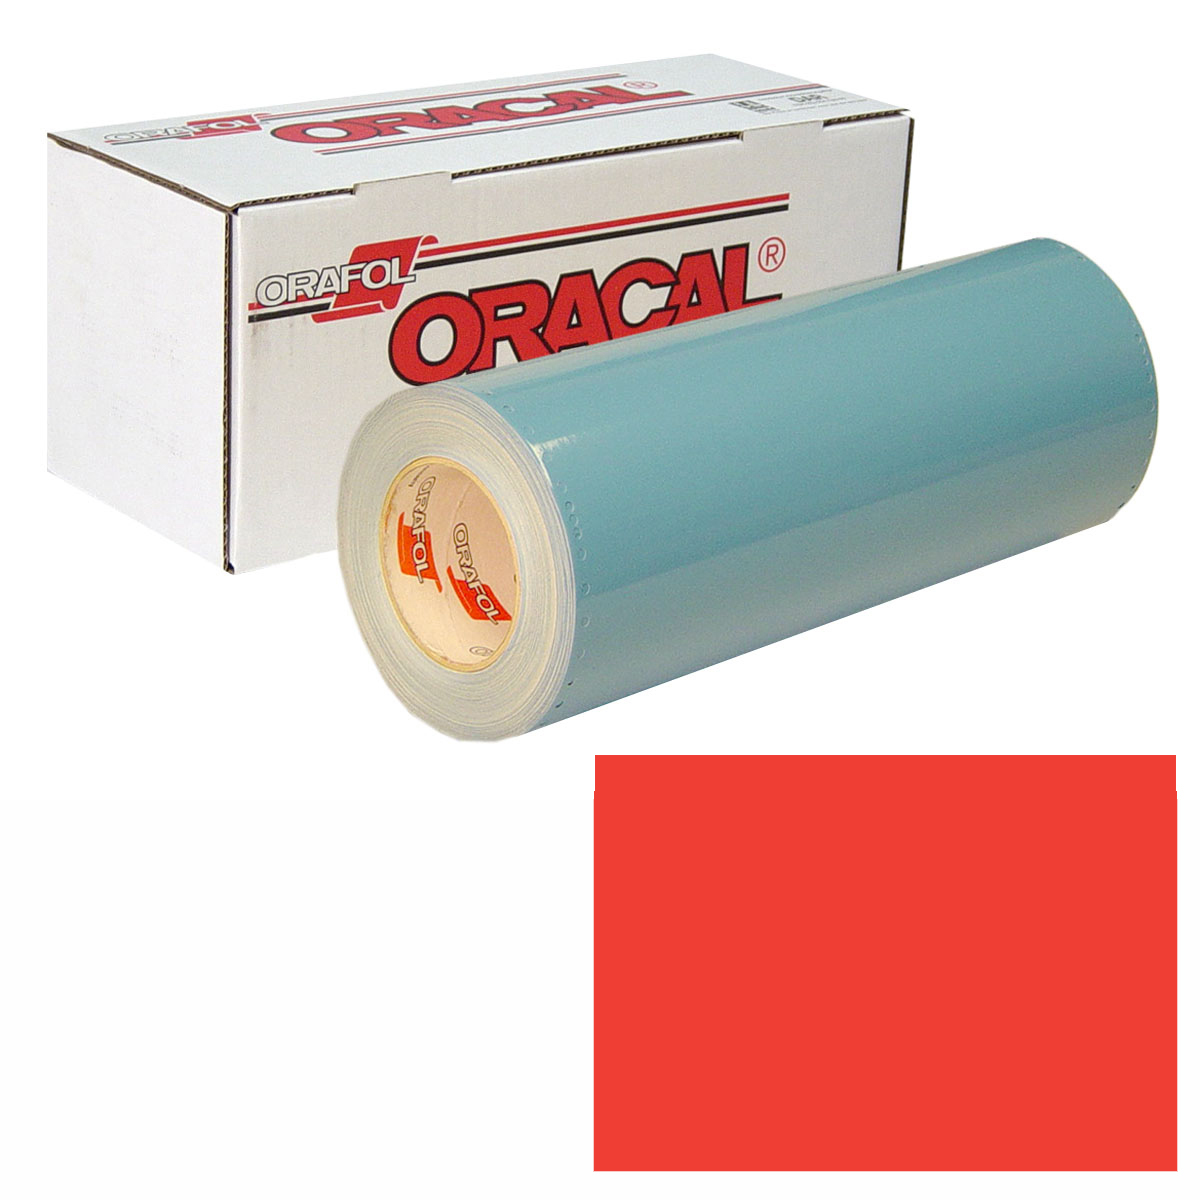 ORACAL 751 30in X 10yd 325 Middle Red